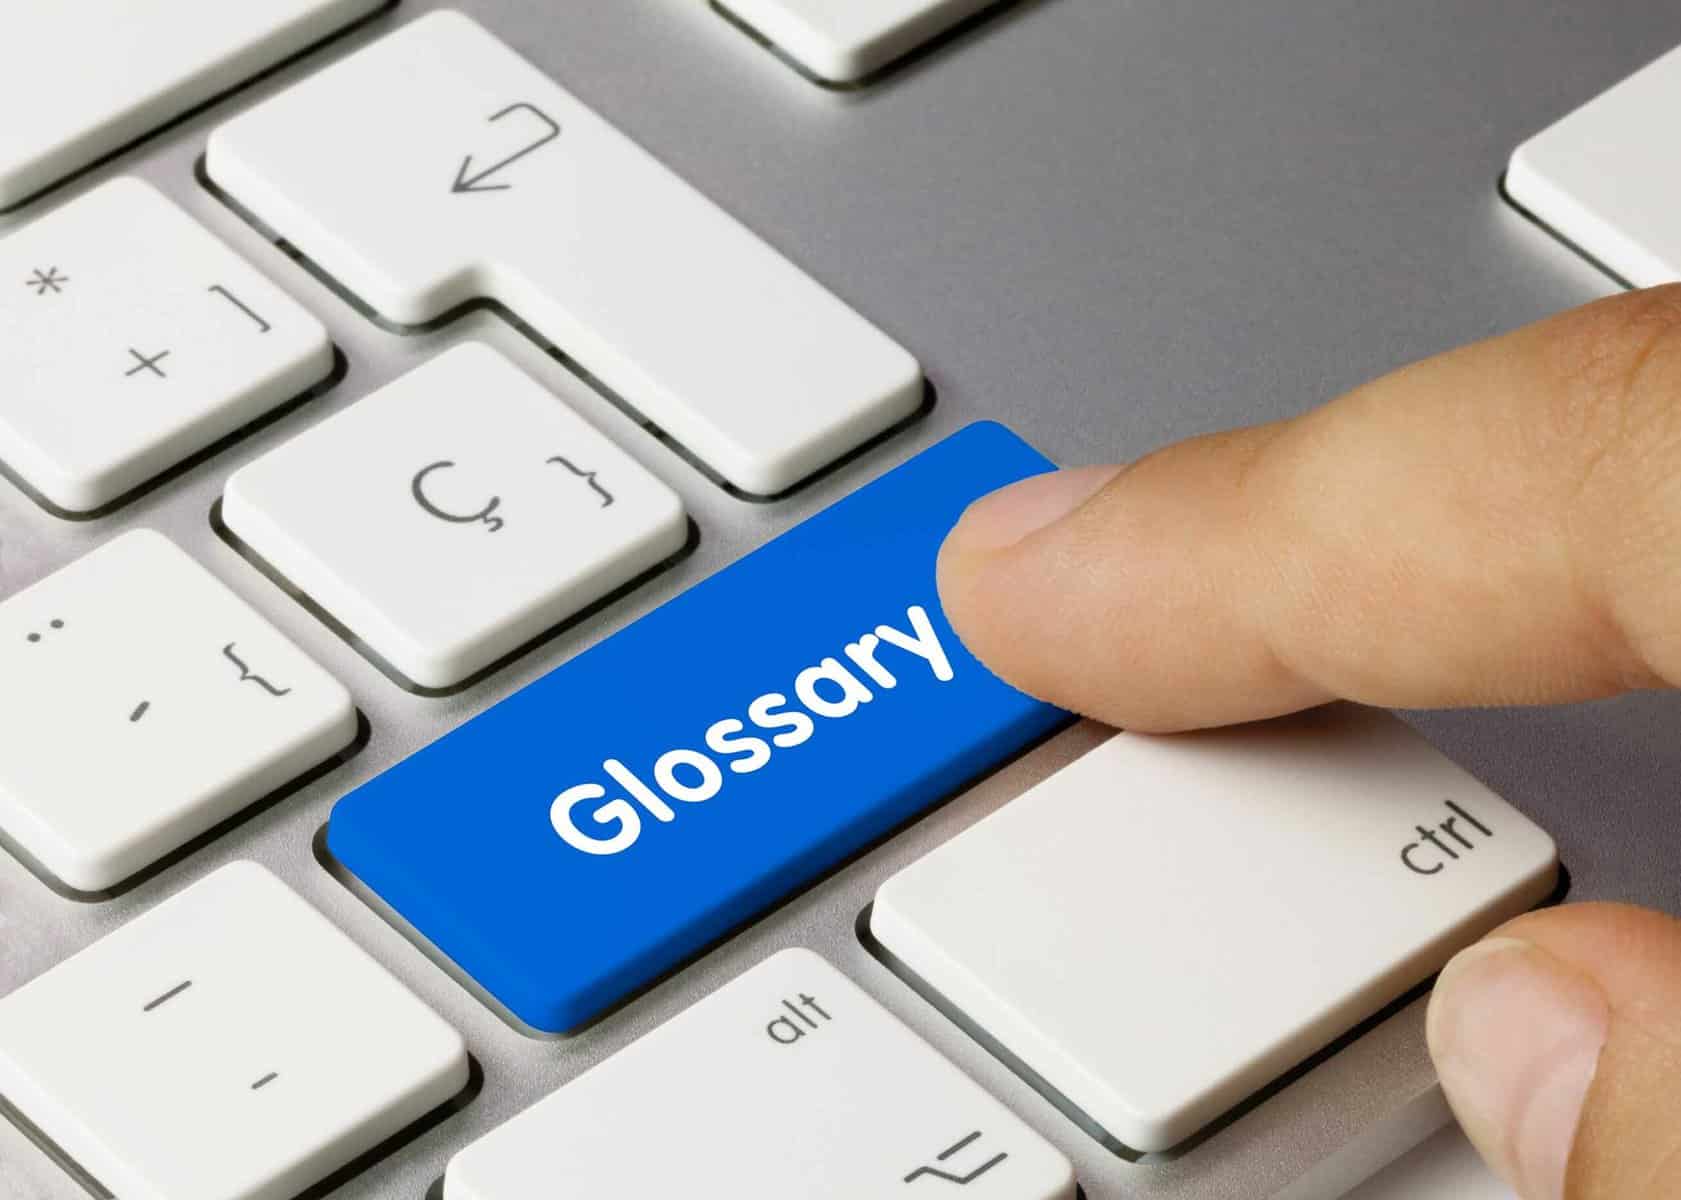 keyboard button that says glossary